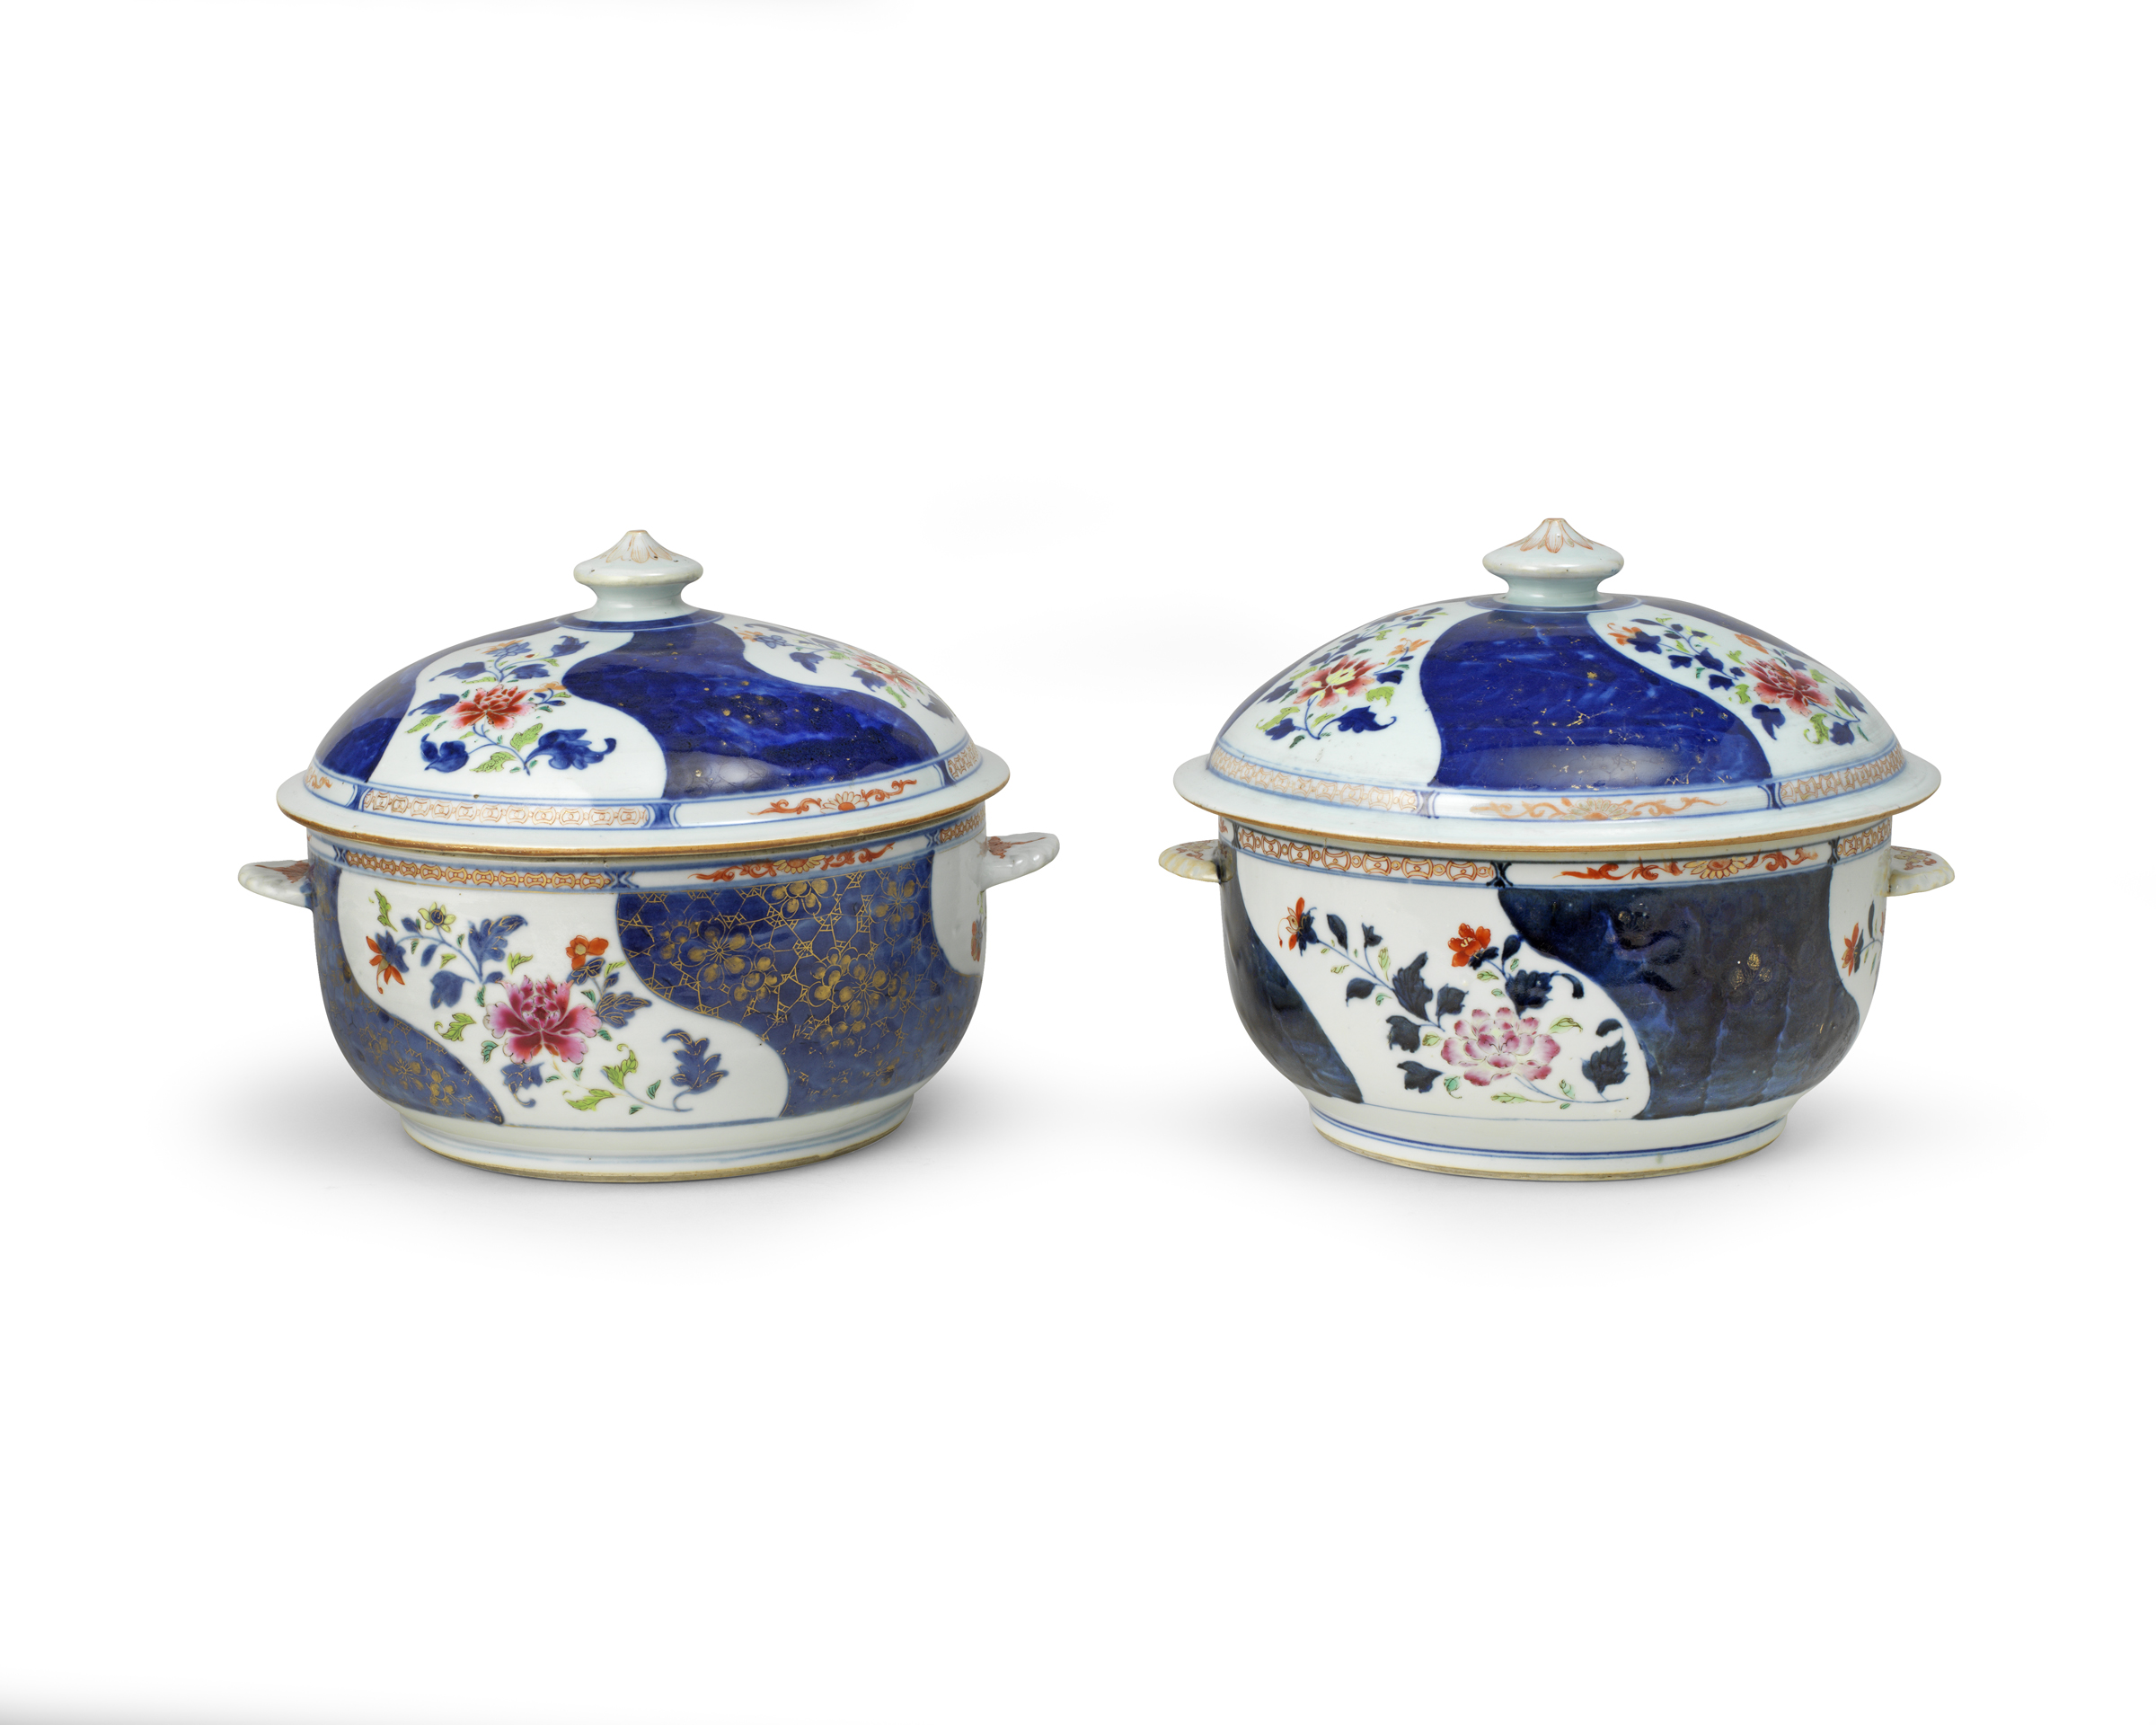 Pair of Tureens and Covers